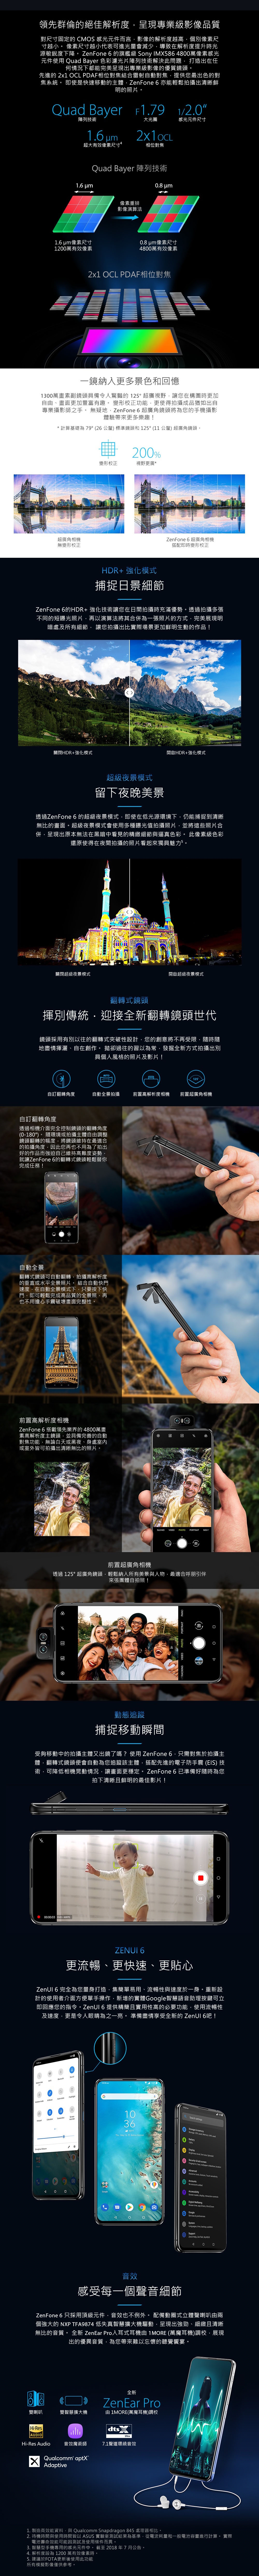 ASUS ZenFone 6 ZS630KL (6G/128G) 迷霧黑 智慧手機